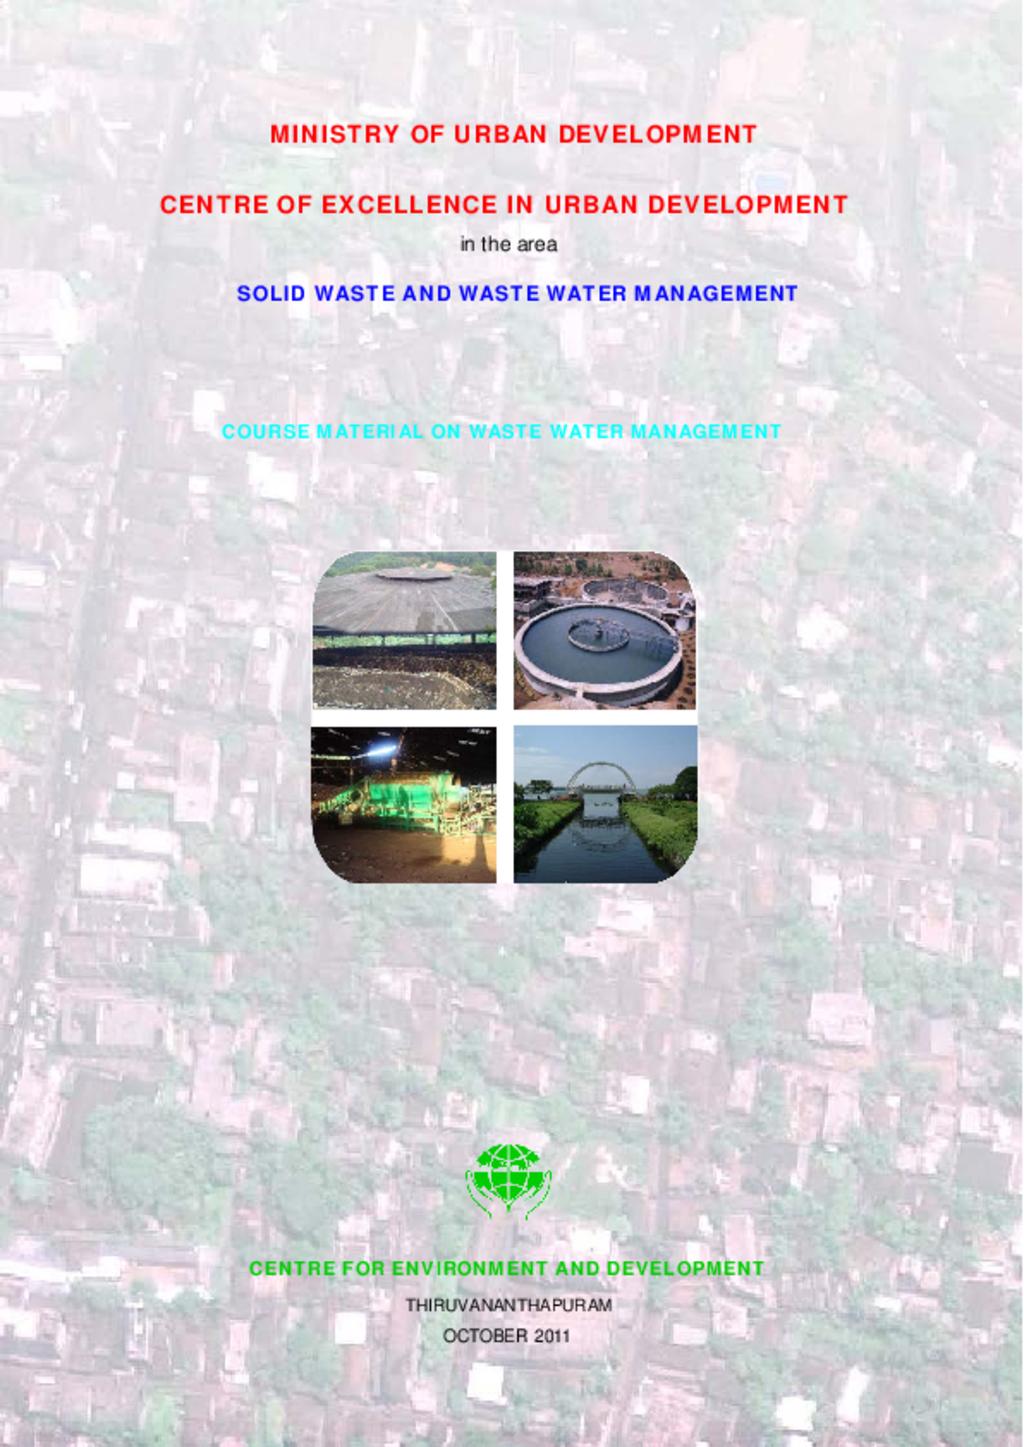 Course material for waste water